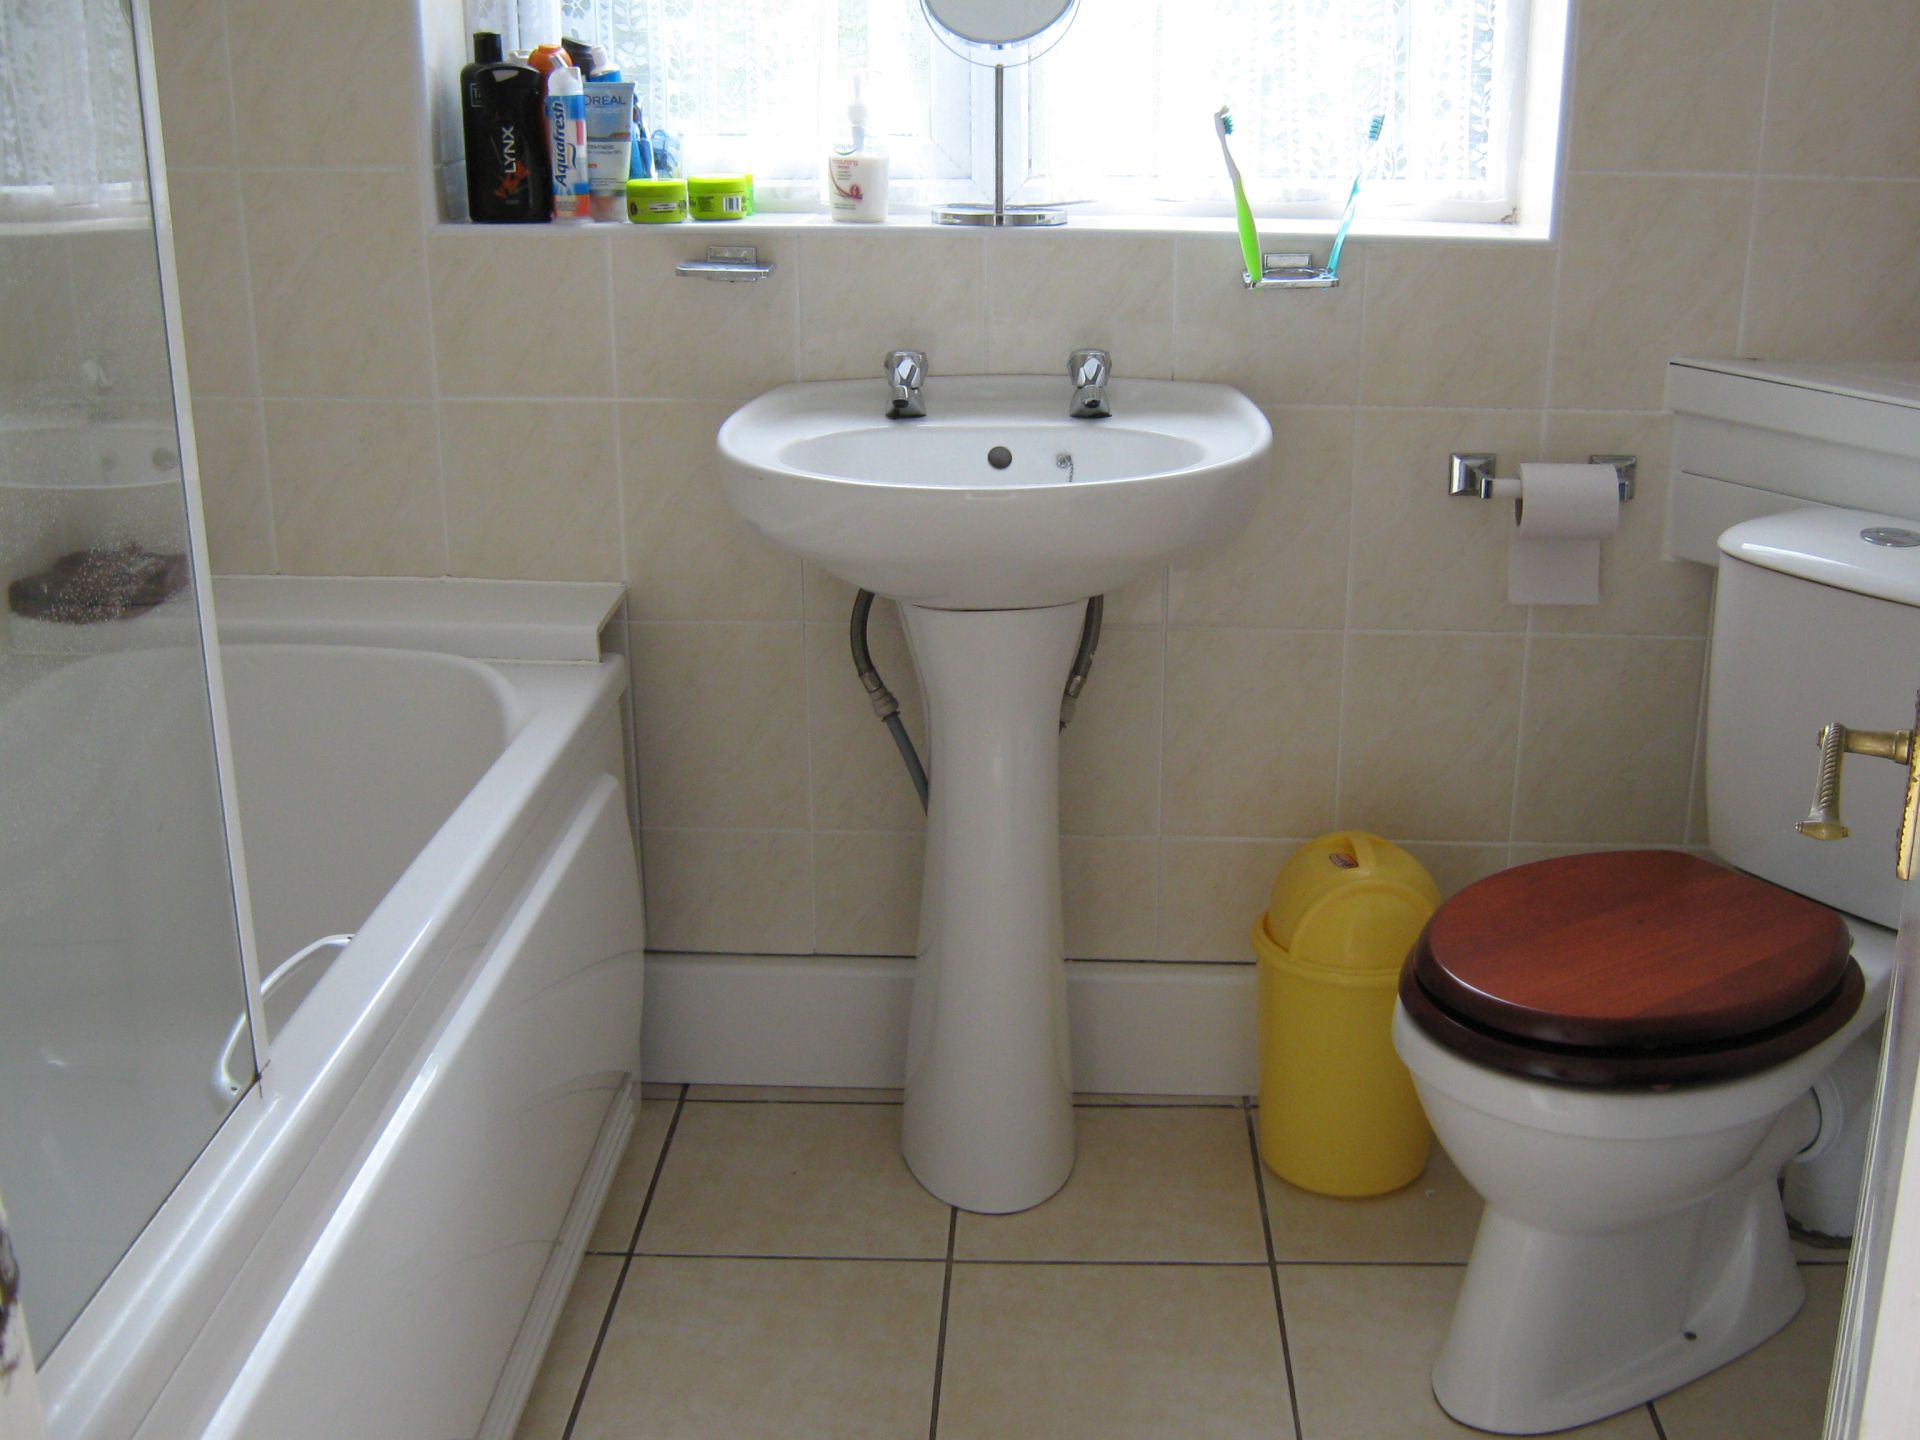 University Student Accommodation 3 bed house in Lancaster bathroom